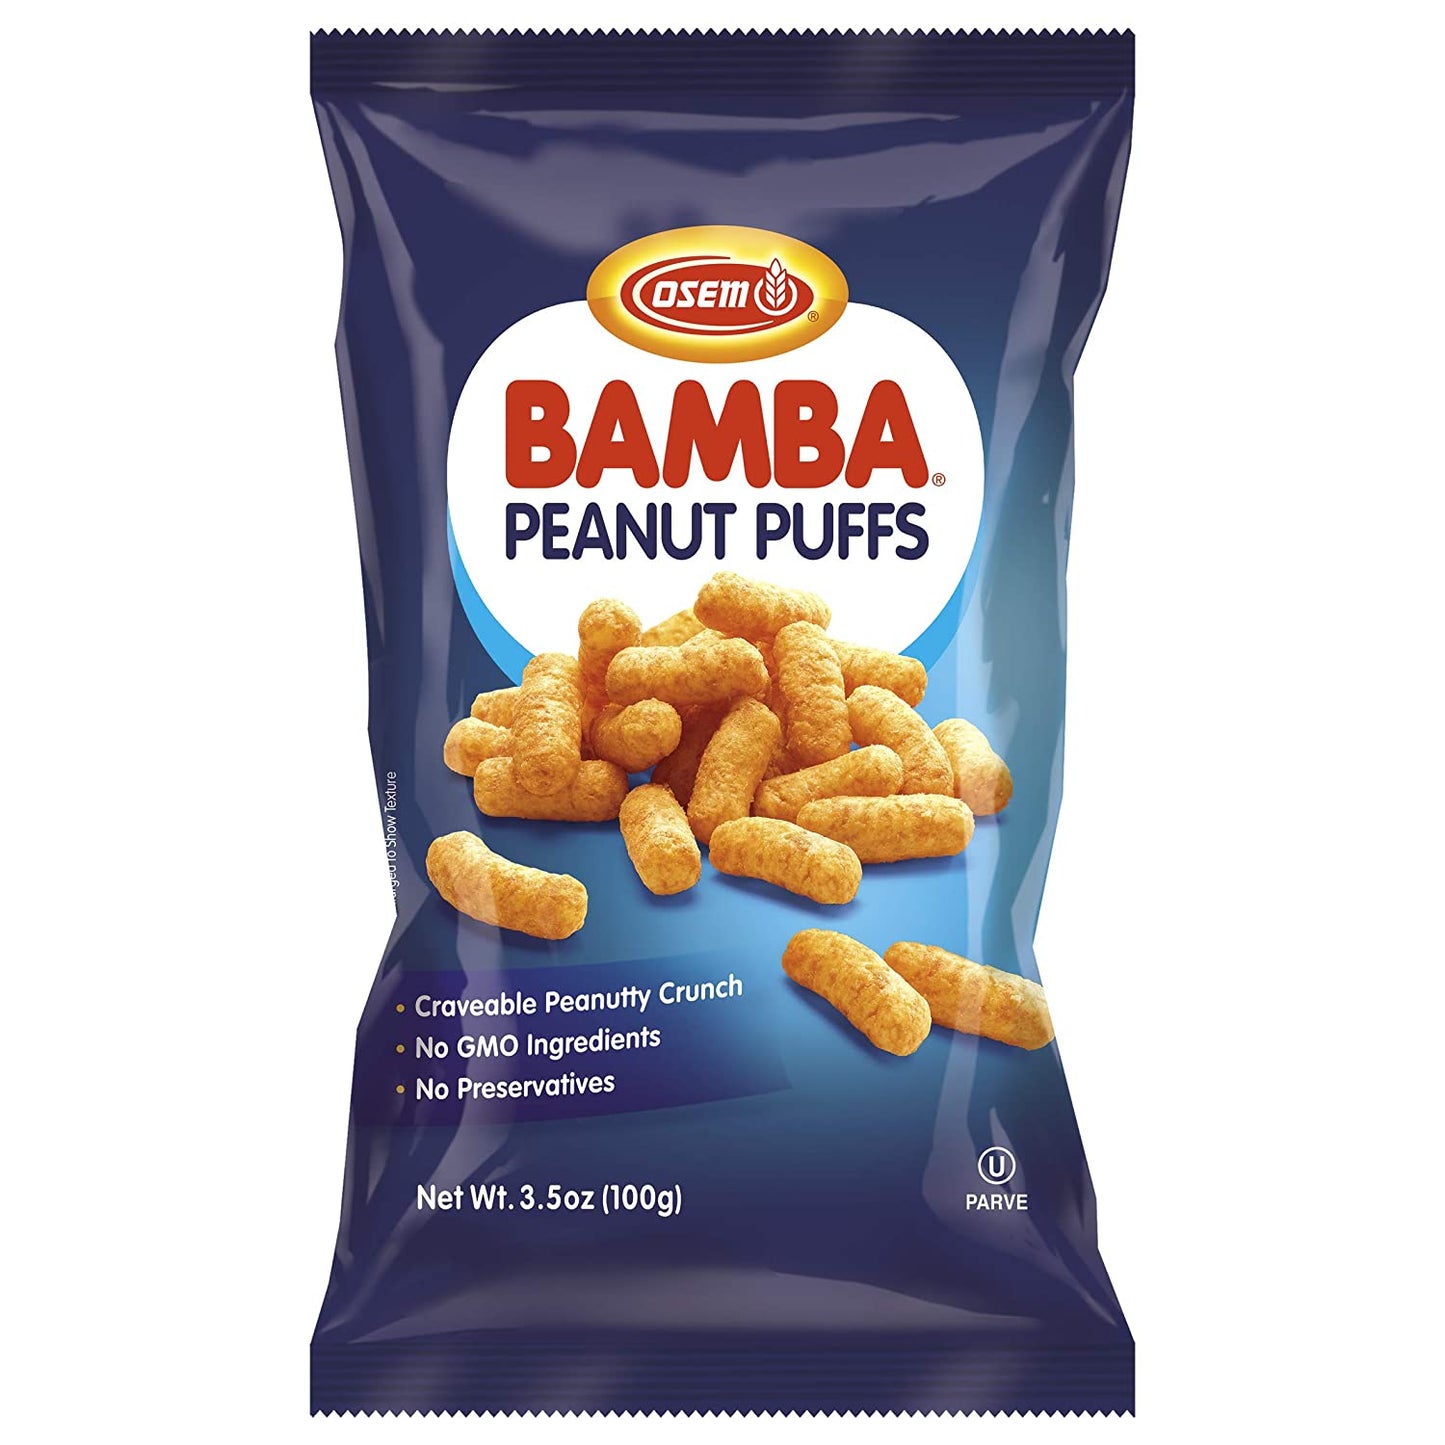 Bamba Peanut Snacks for Babies - All Natural Baby Peanut Puffs 3.5 Ounce Large Bag (Pack of 6 x 3.5oz Bags) - Peanut Butter Puffs made with 50% peanuts